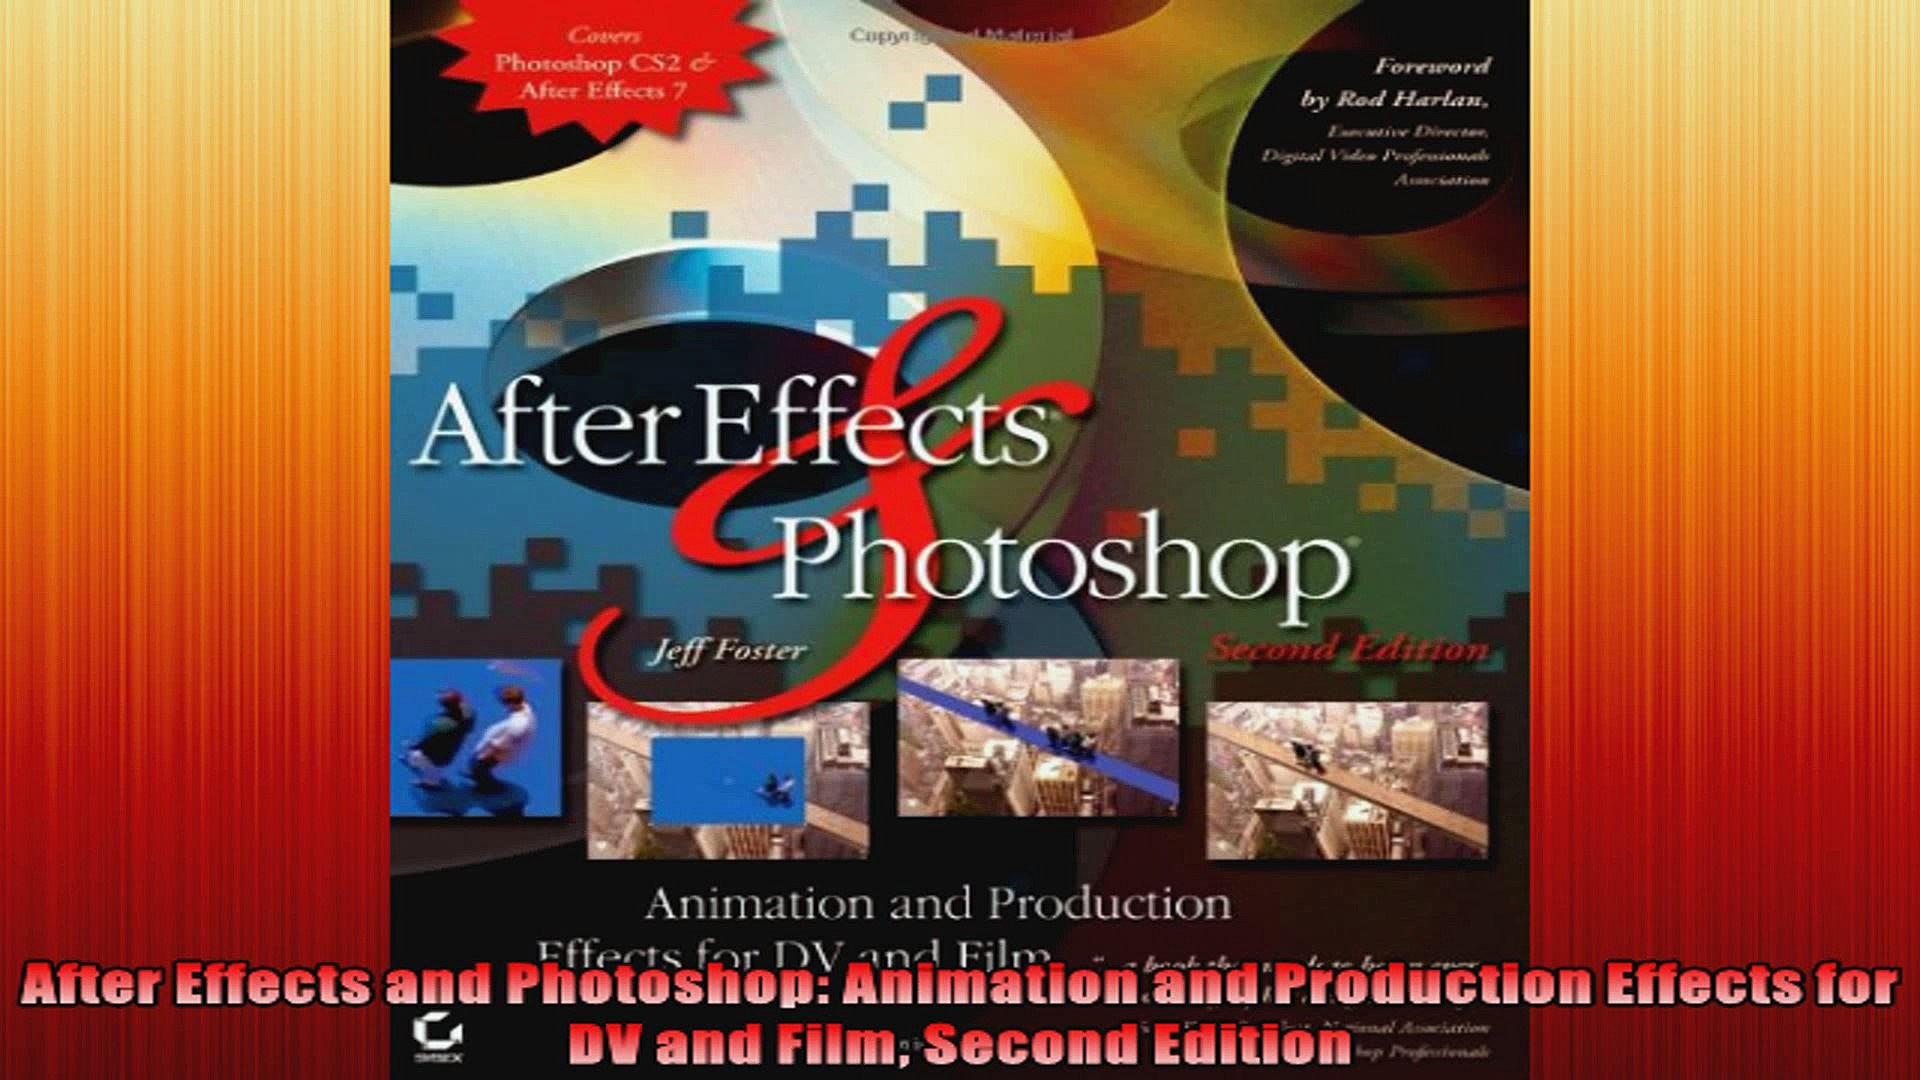 After Effects and Photoshop Animation and Production Effects for DV and Film Second